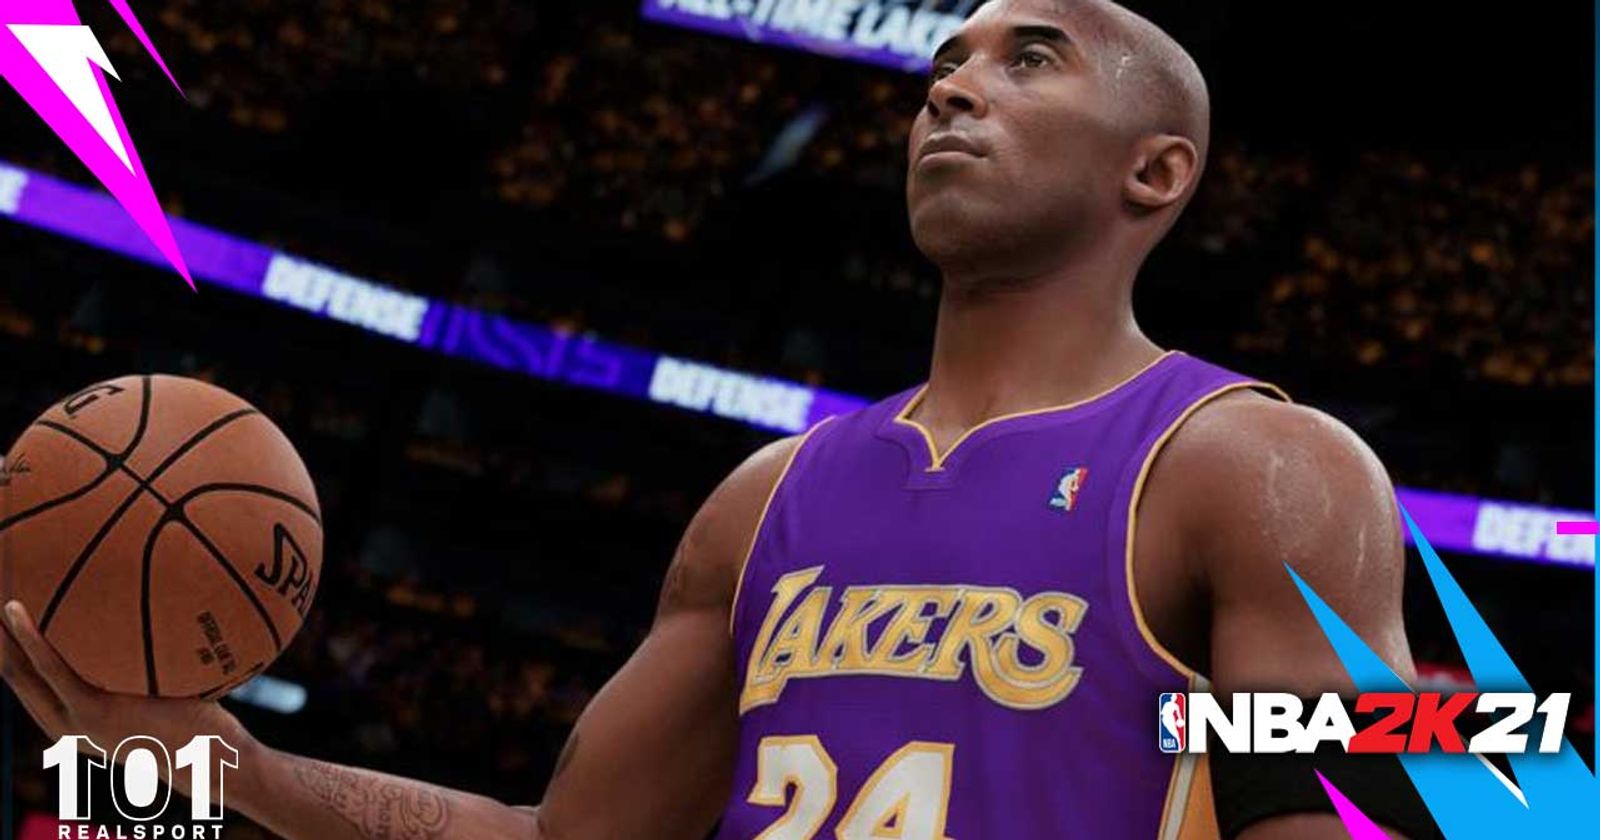 NBA 2K21 pre-order guide: Mamba Forever Edition, next-gen versions